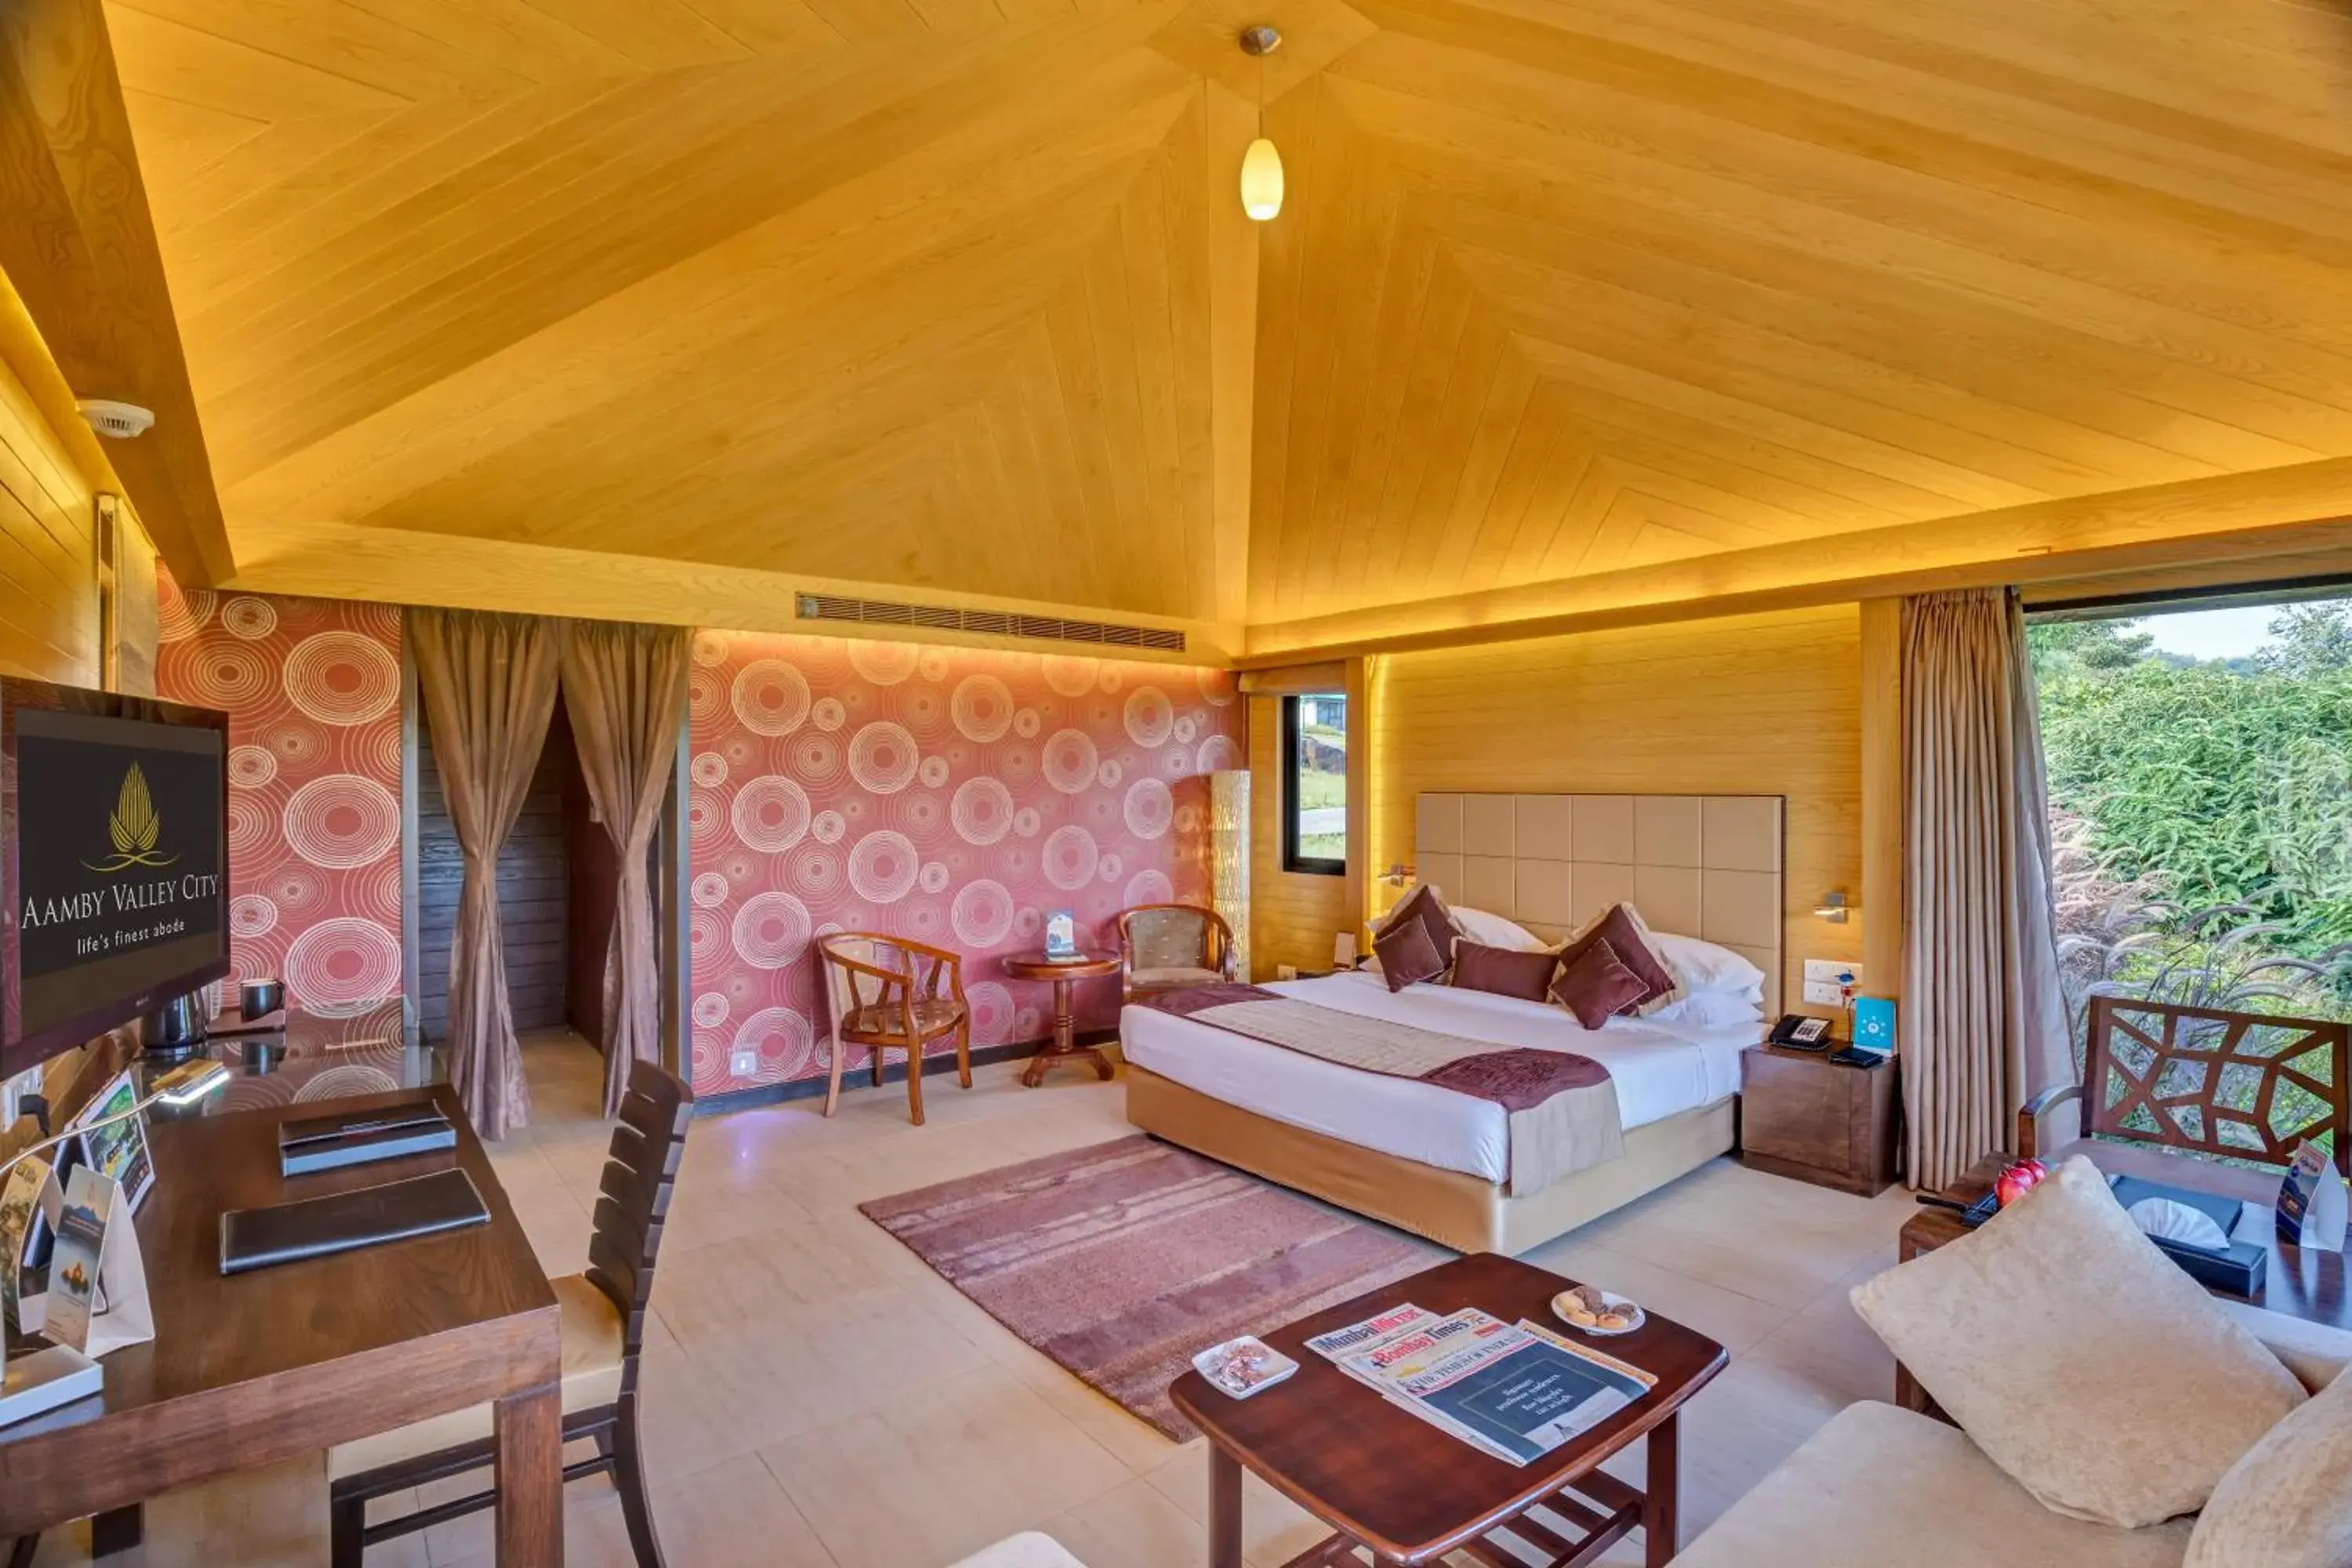 Bedroom in Aamby Valley City